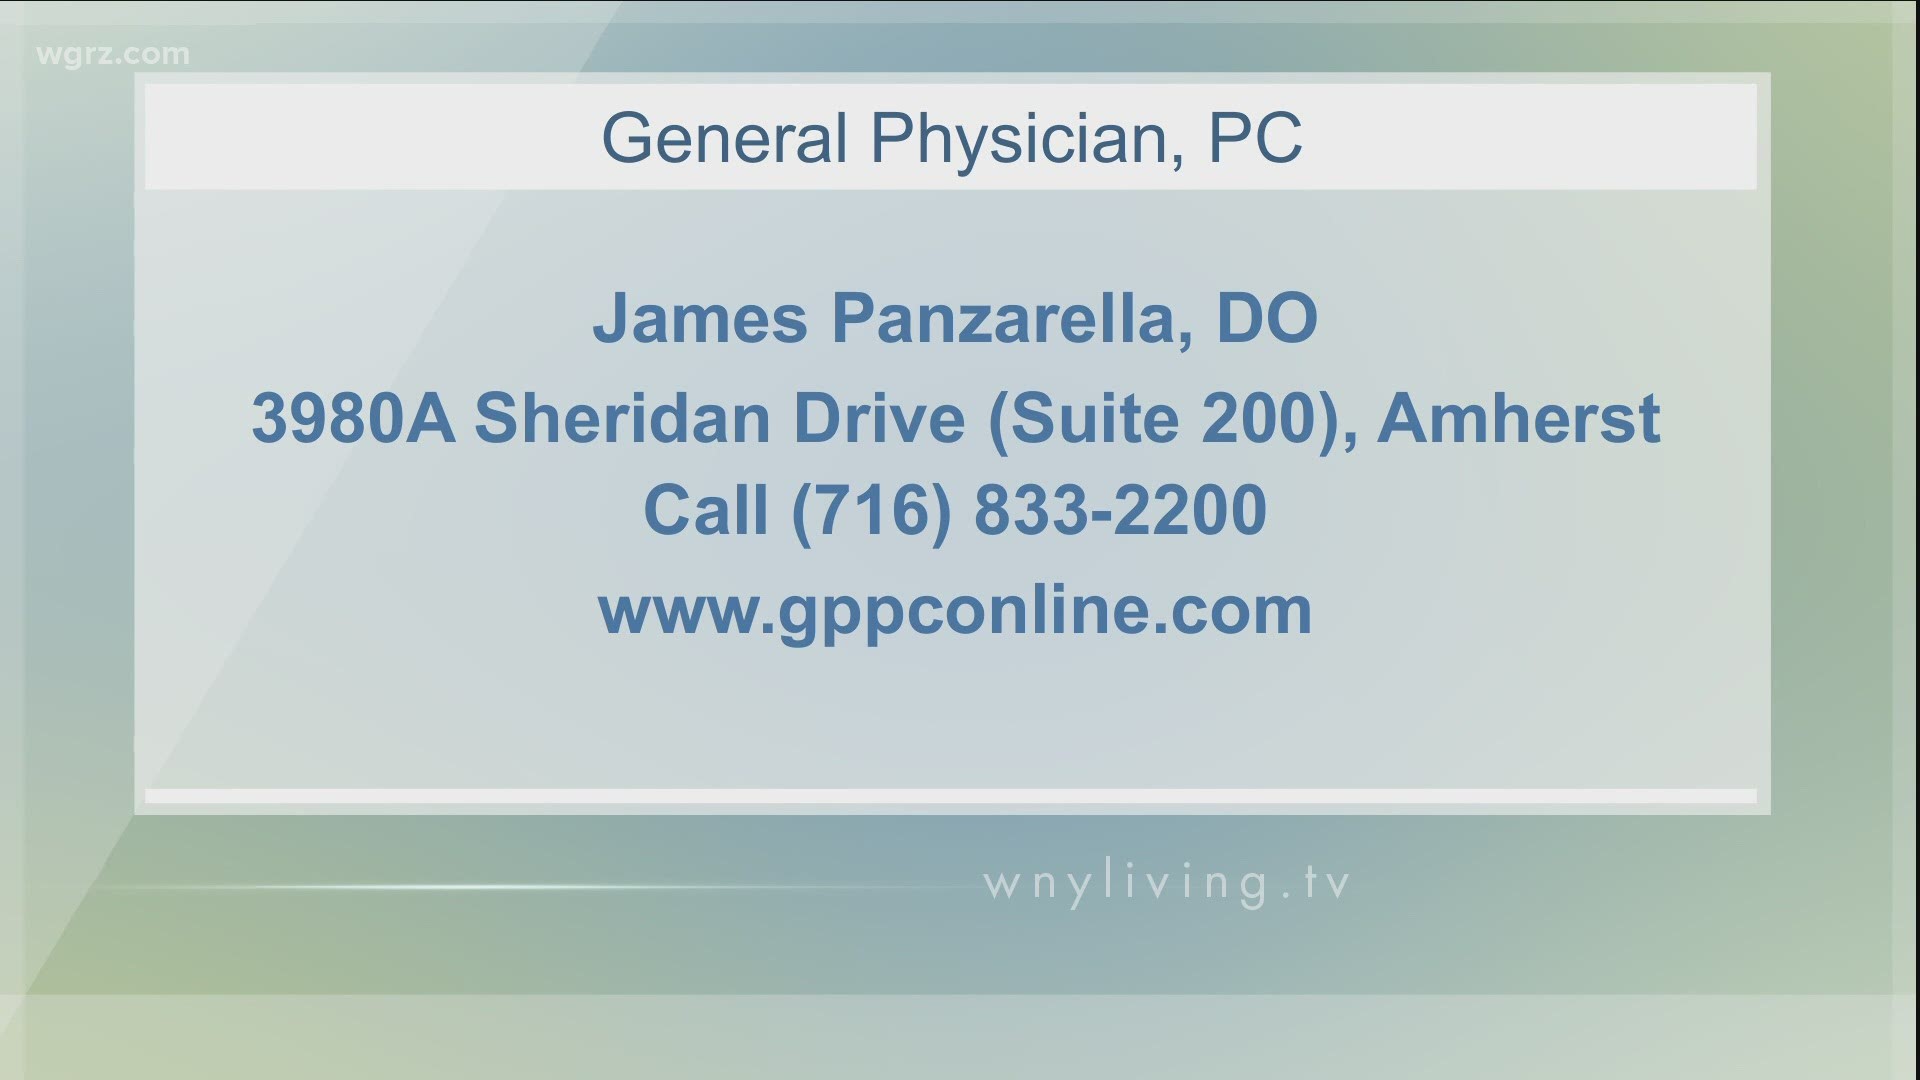 WNY Living - August 8 - General Physician, PC (THIS VIDEO IS SPONSORED BY GENERAL PHYSICIAN, PC)